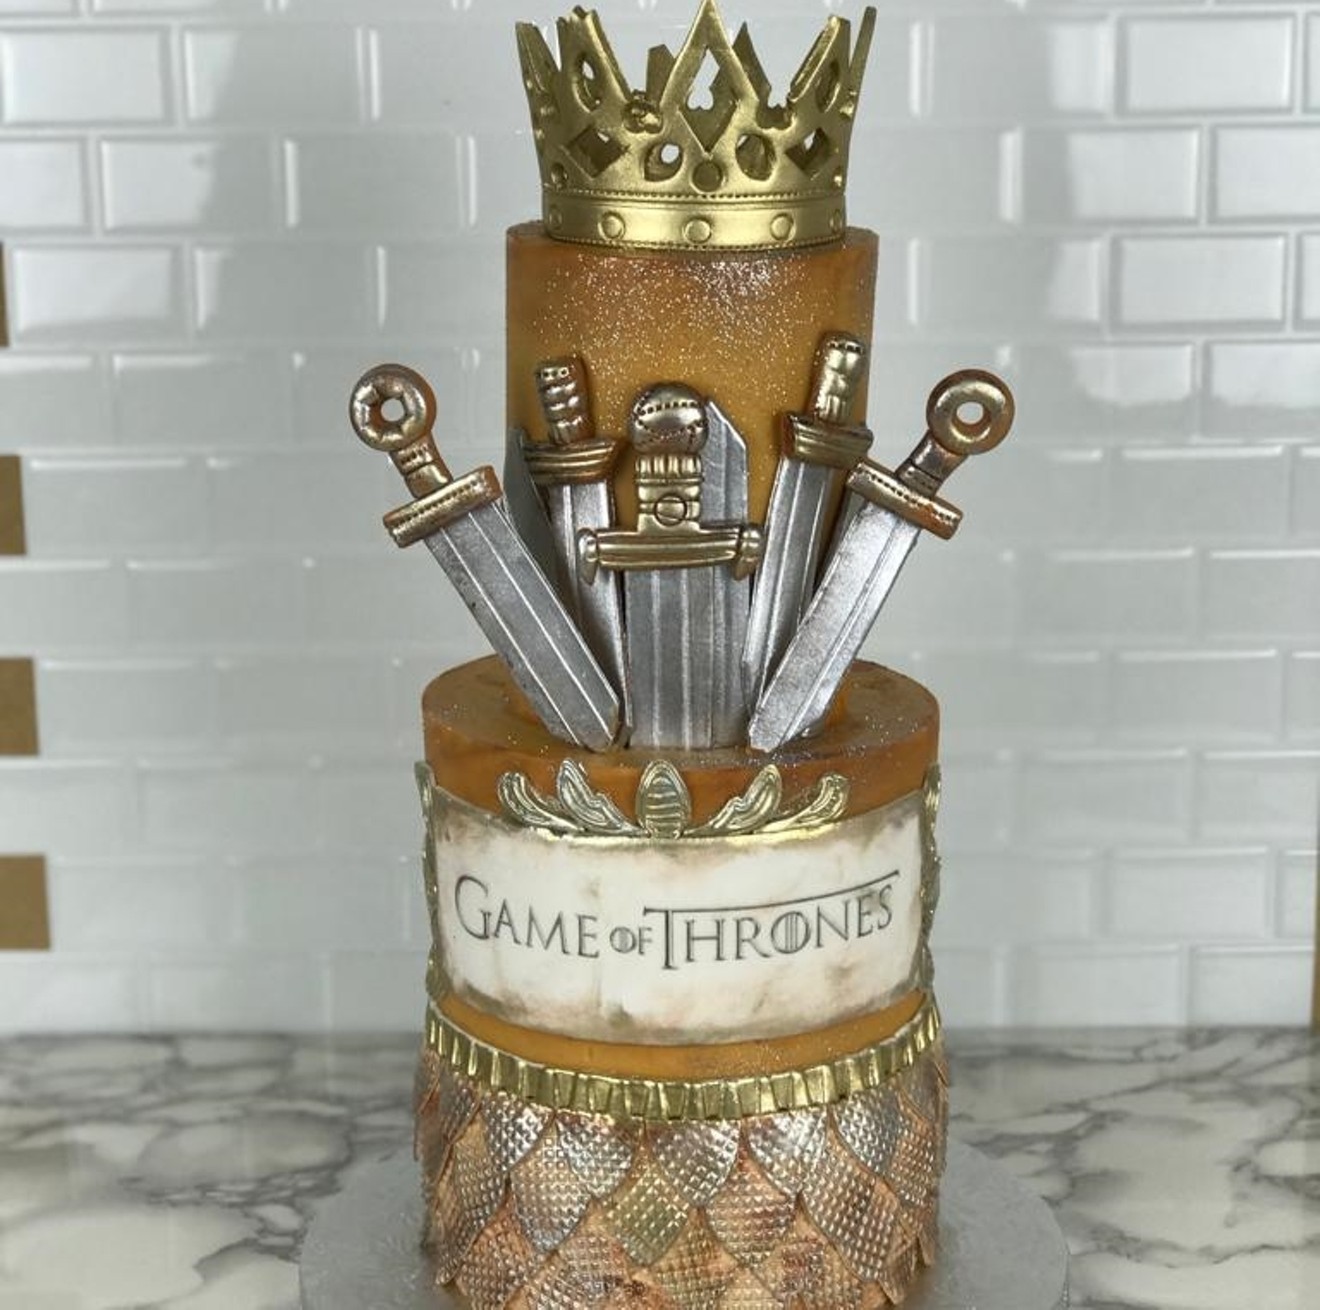 Who needs an Iron Throne when you have cake?